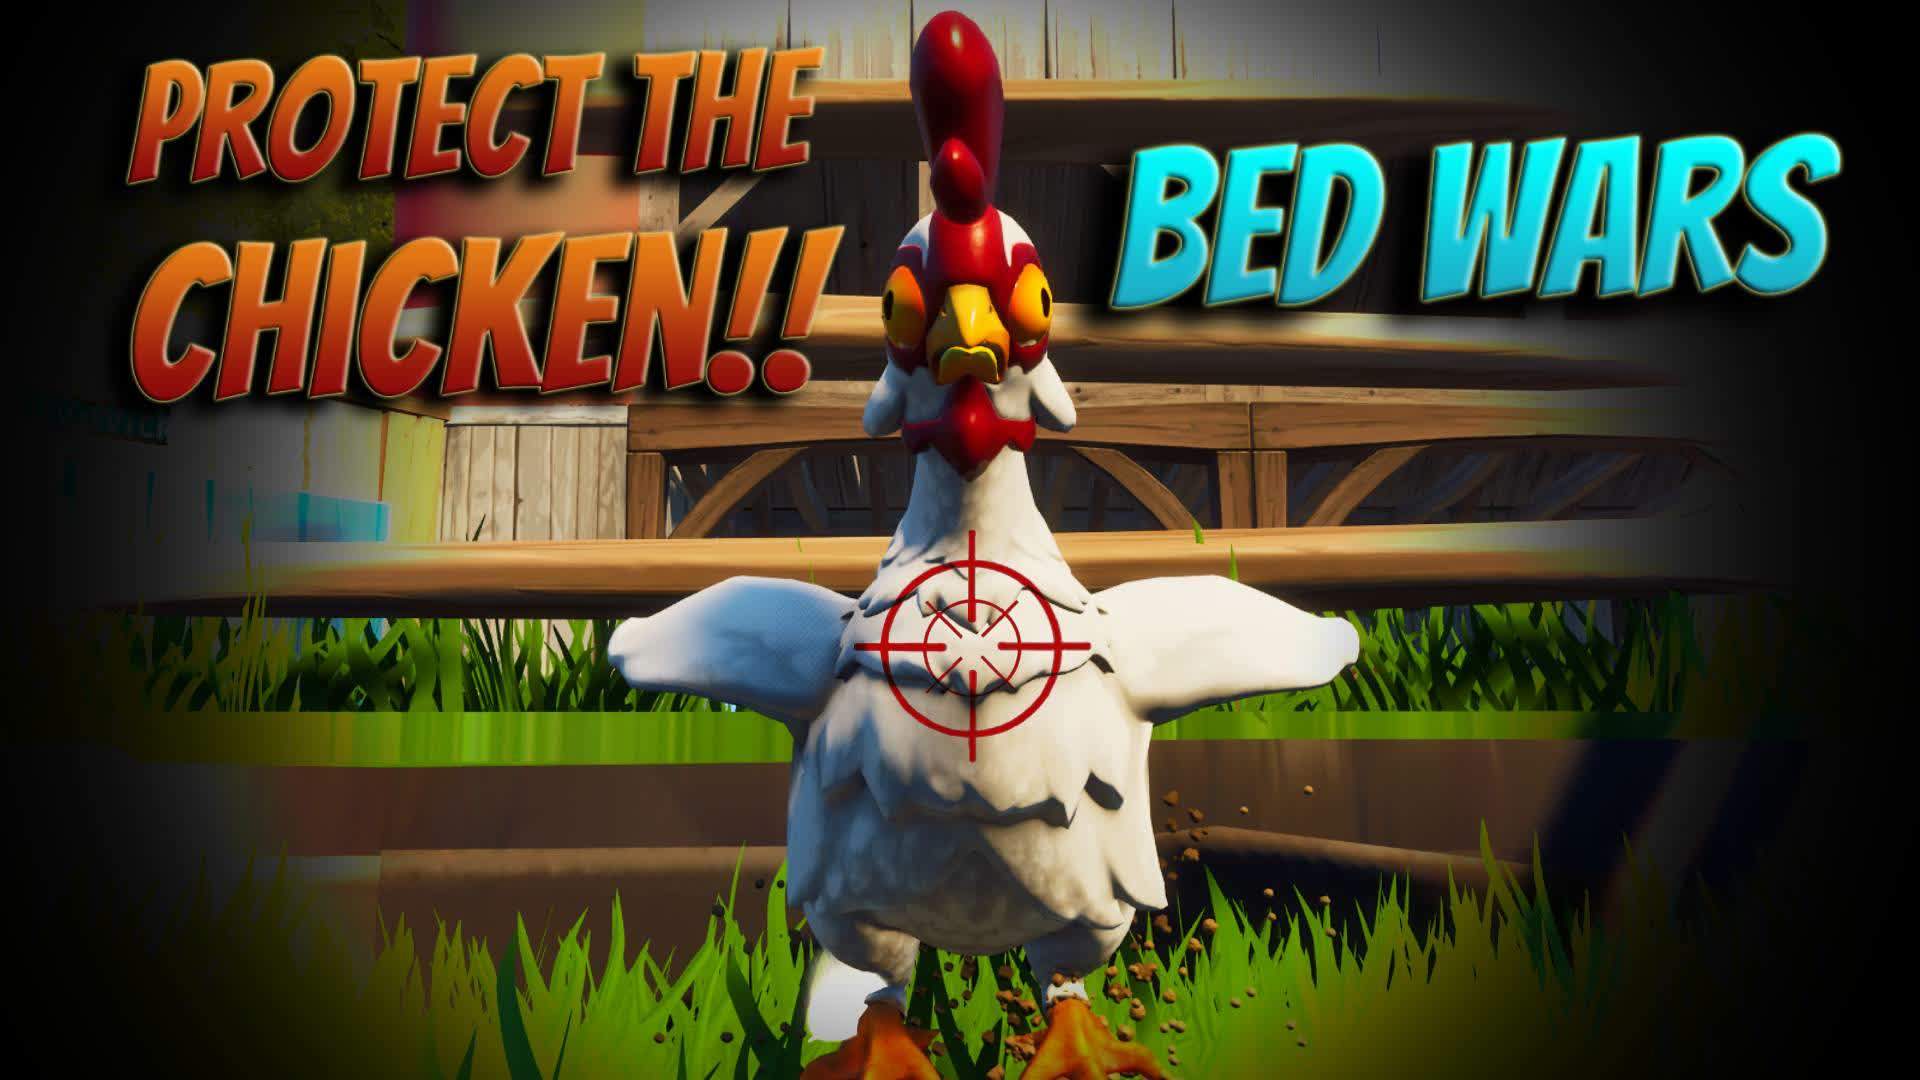 Protect the Chicken - Bed Wars